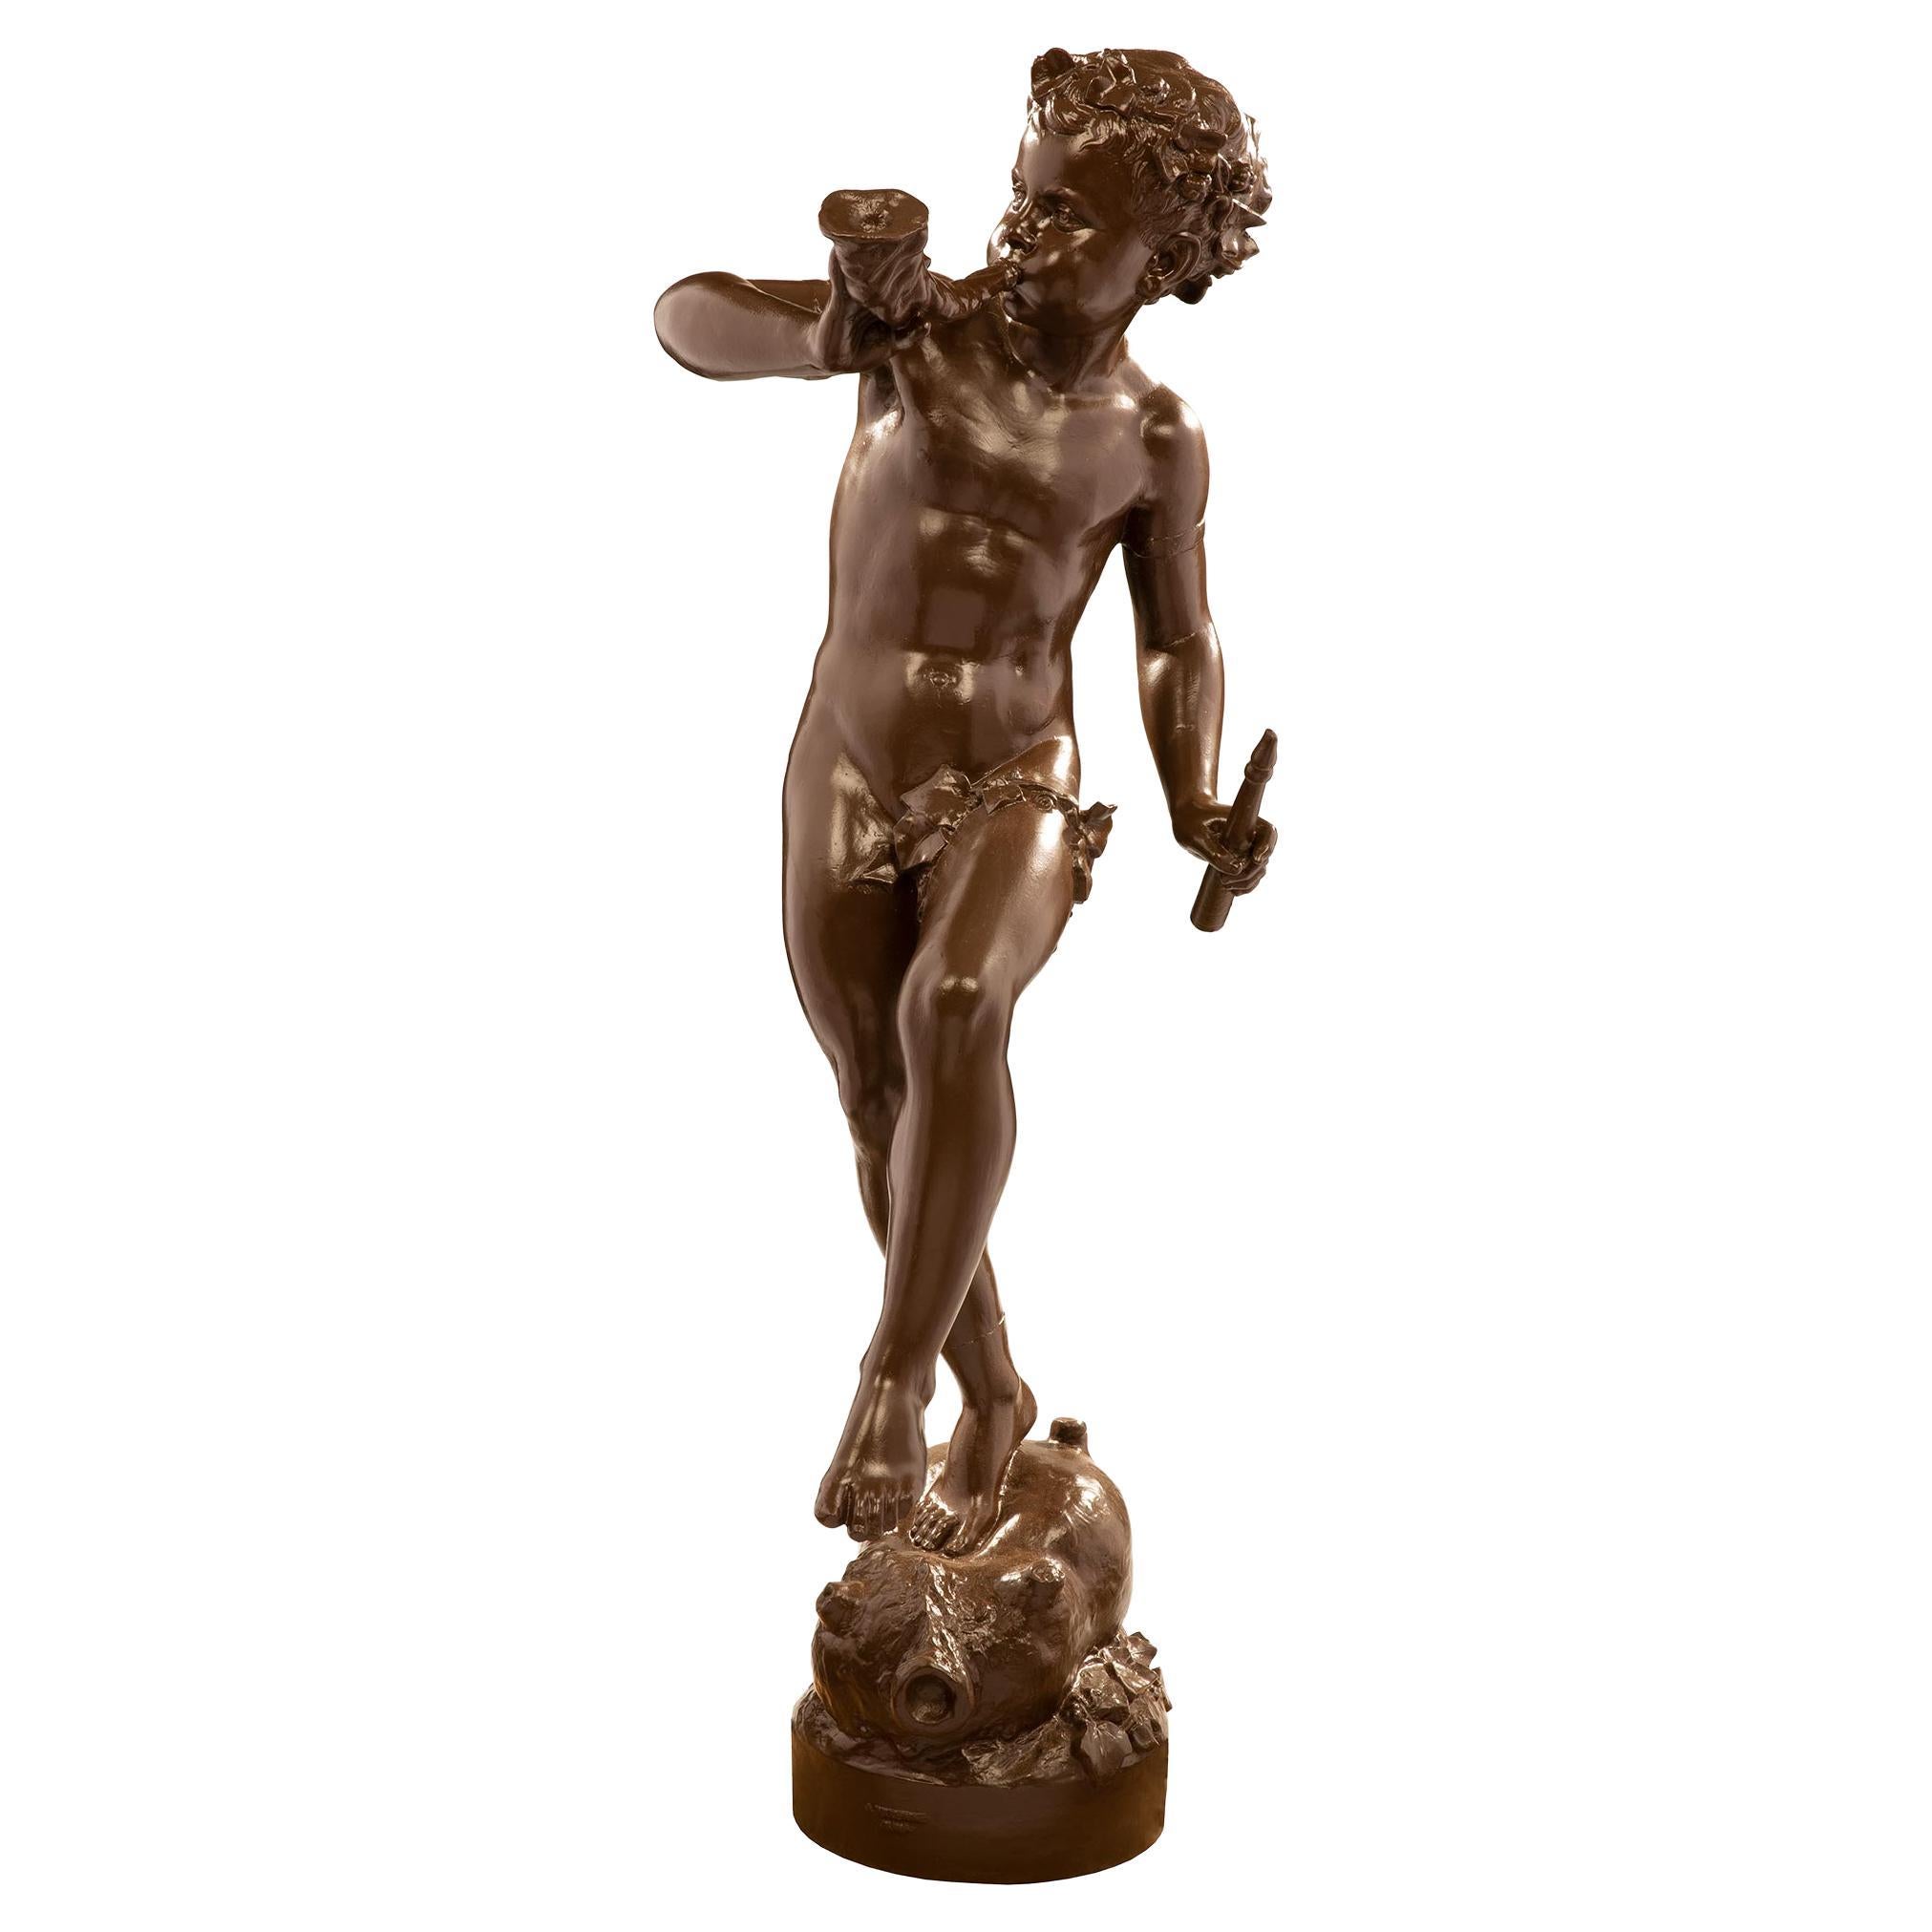 French 19th Century Cast Iron Statue of a Young Boy, Signed ‘A. DURENNE, Paris’ For Sale